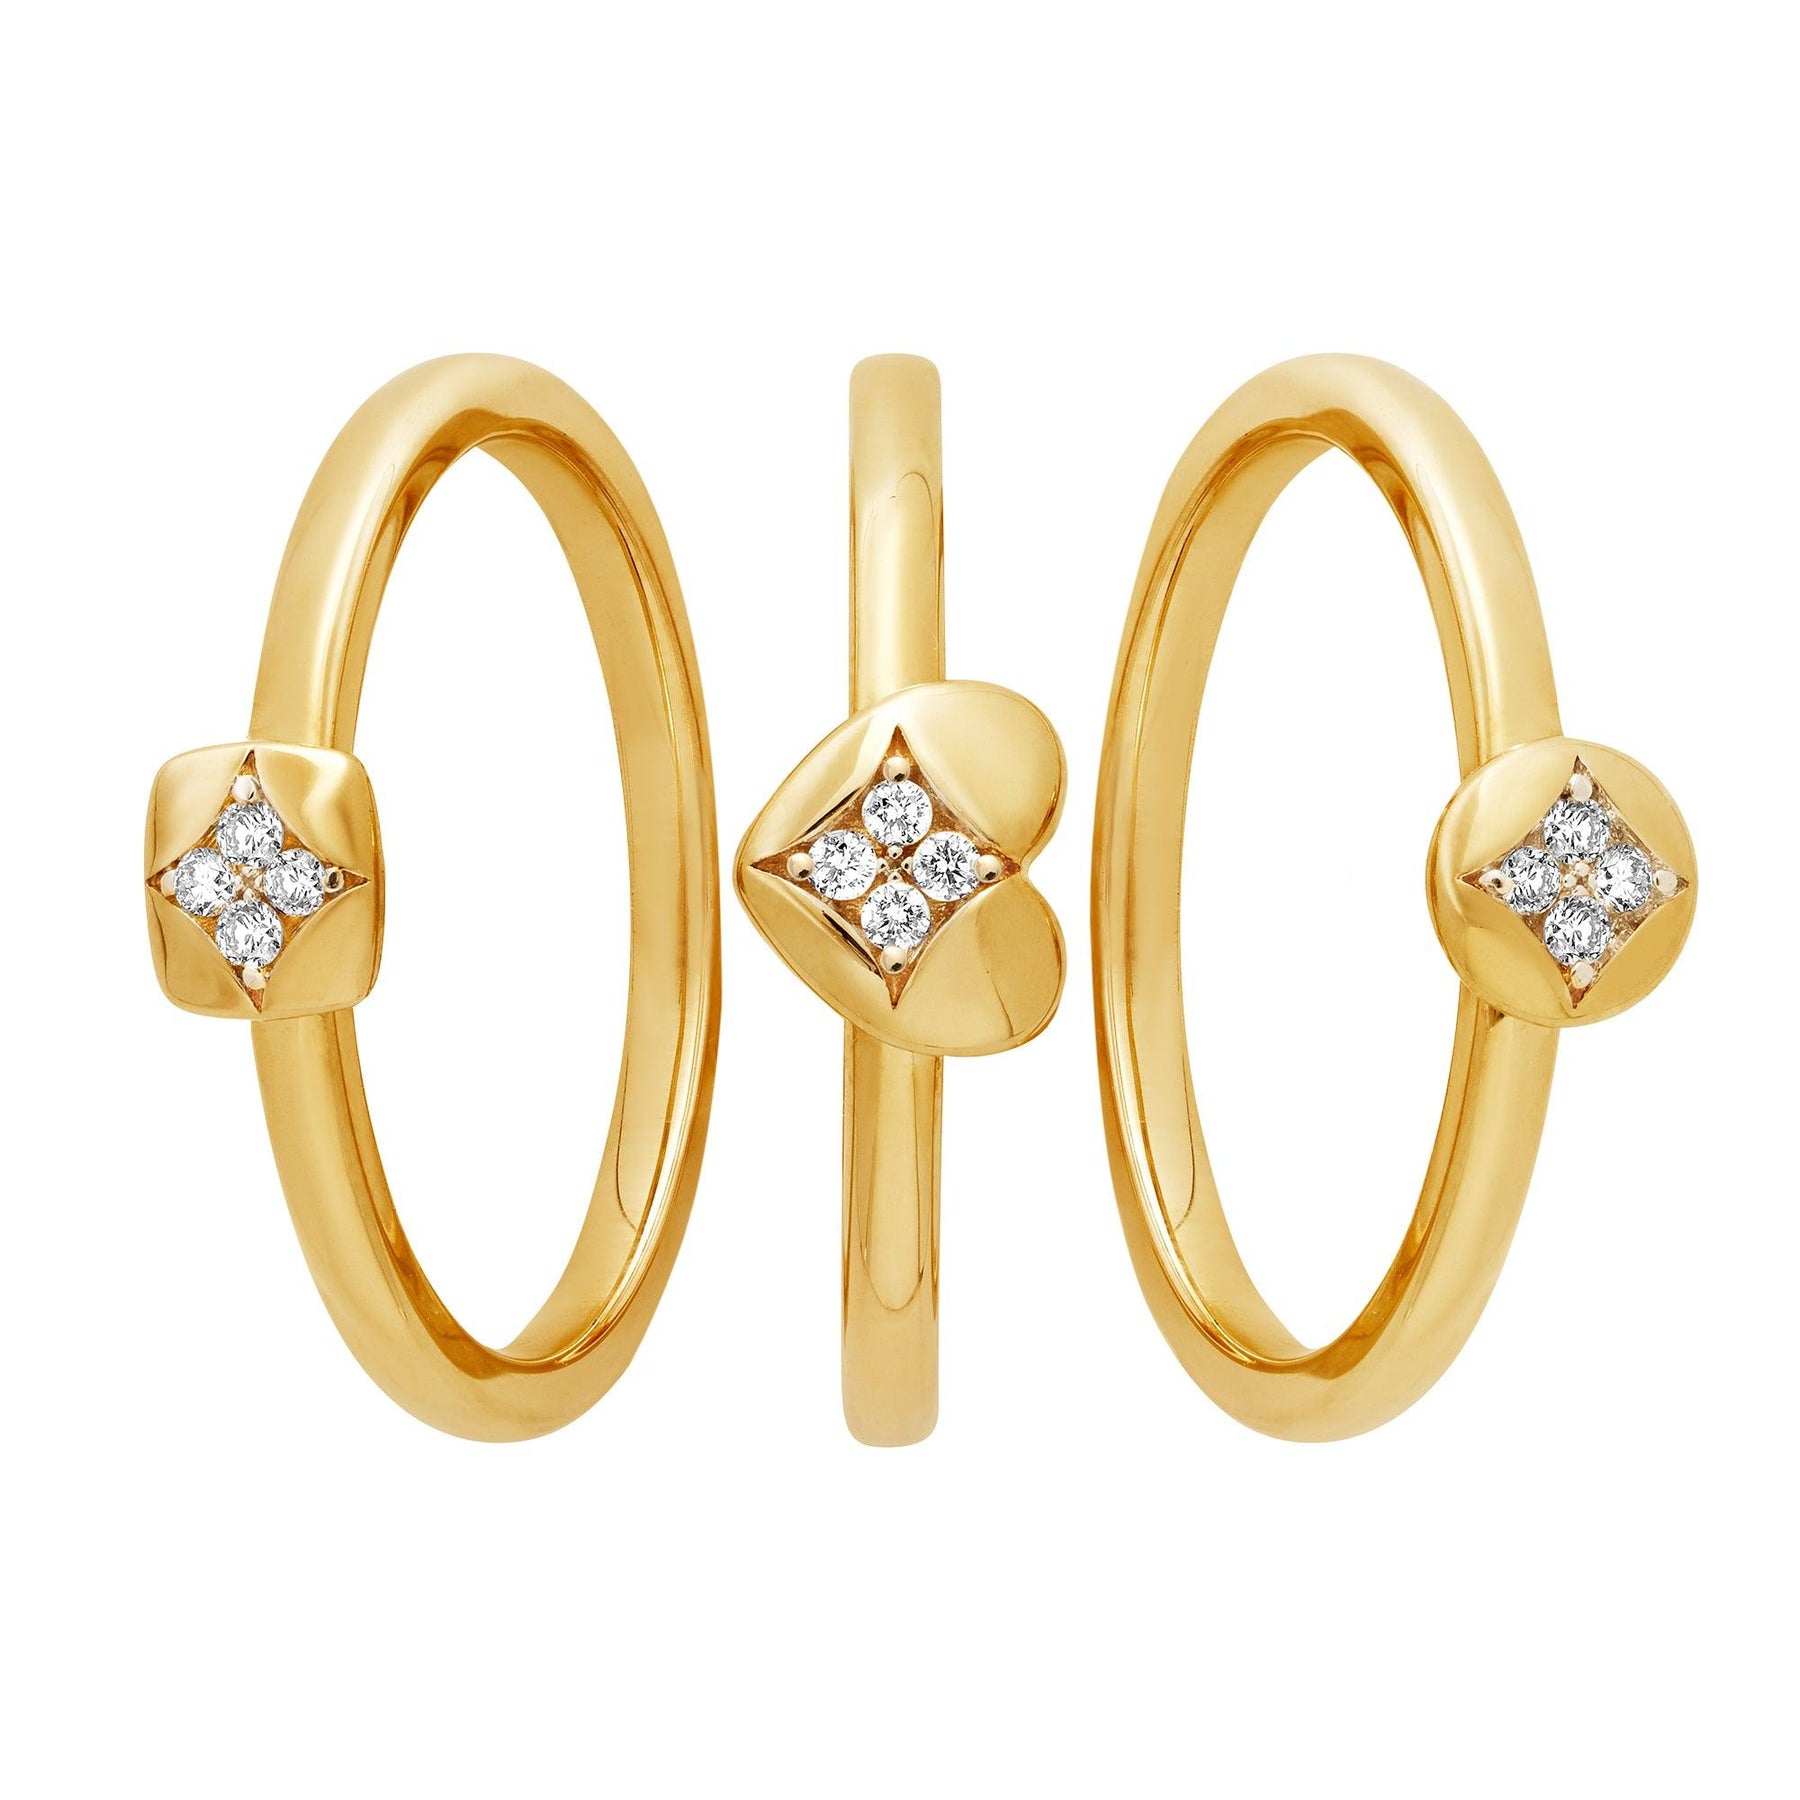 Diamond Stacker Ring in 9ct Yellow Gold - Wallace Bishop